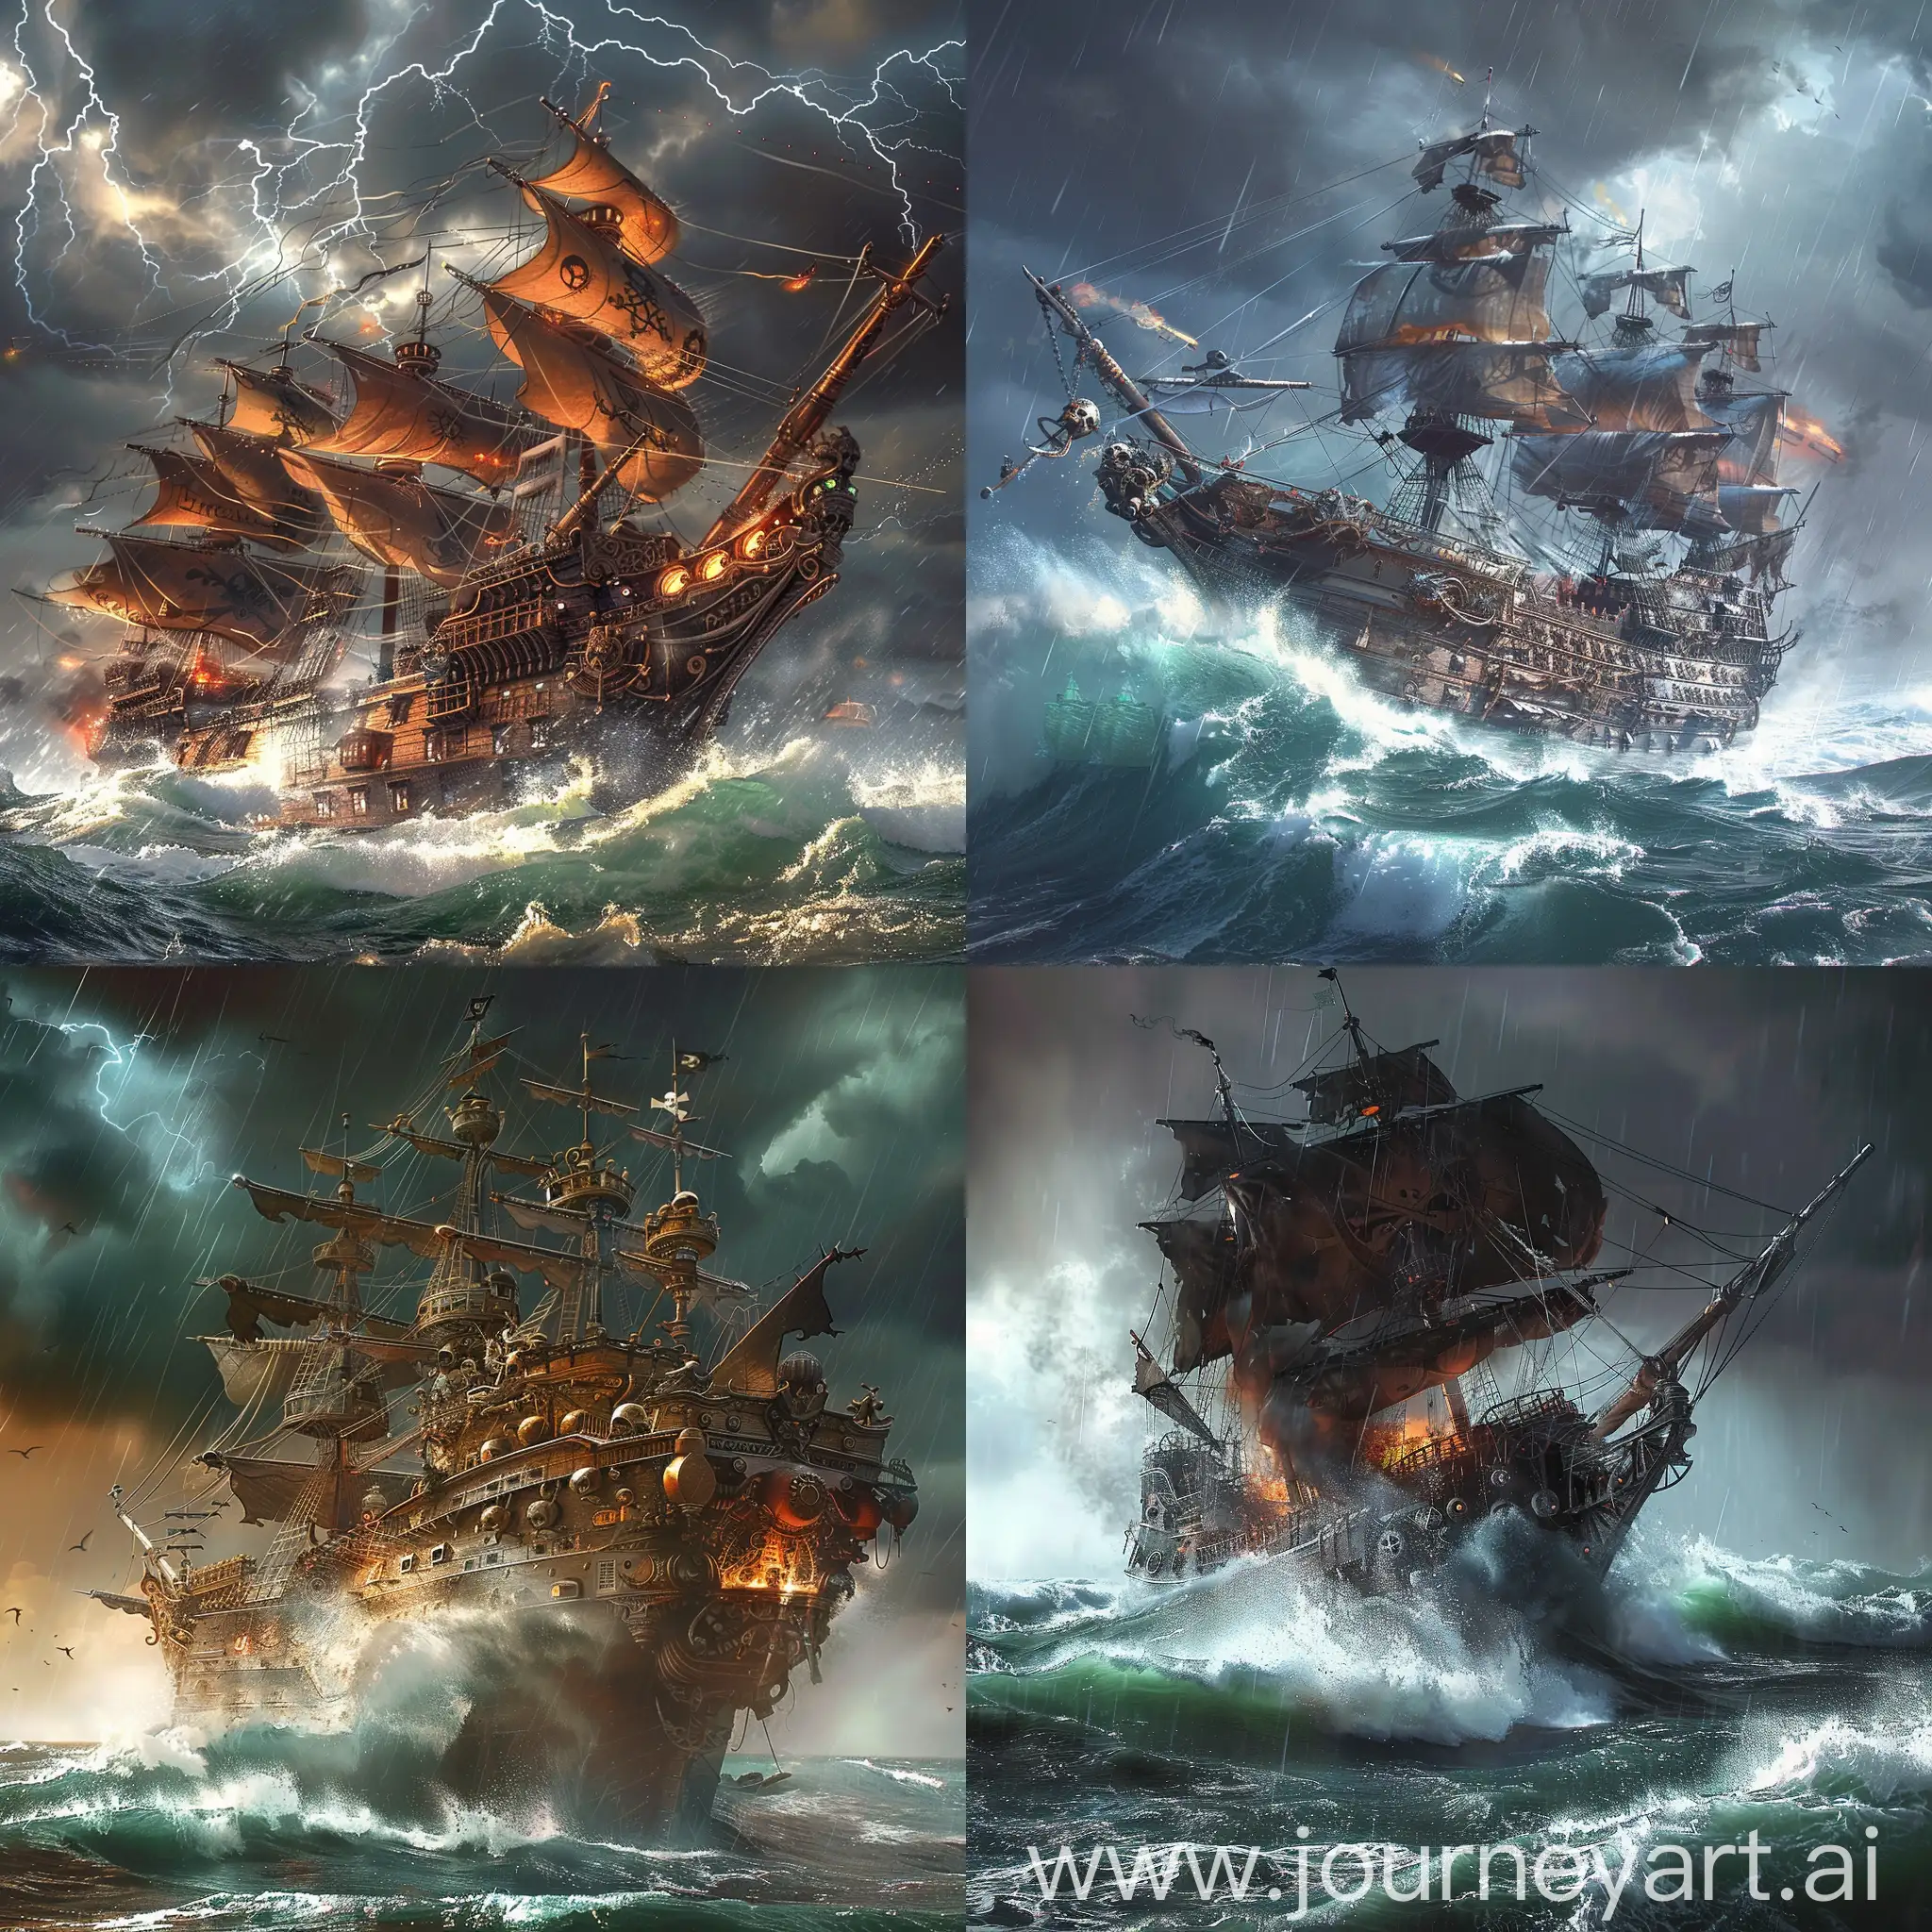  Steampunk pirate ship sailing through the stormy sea, fantasy, epic, raging waves, hyperdetailed. 